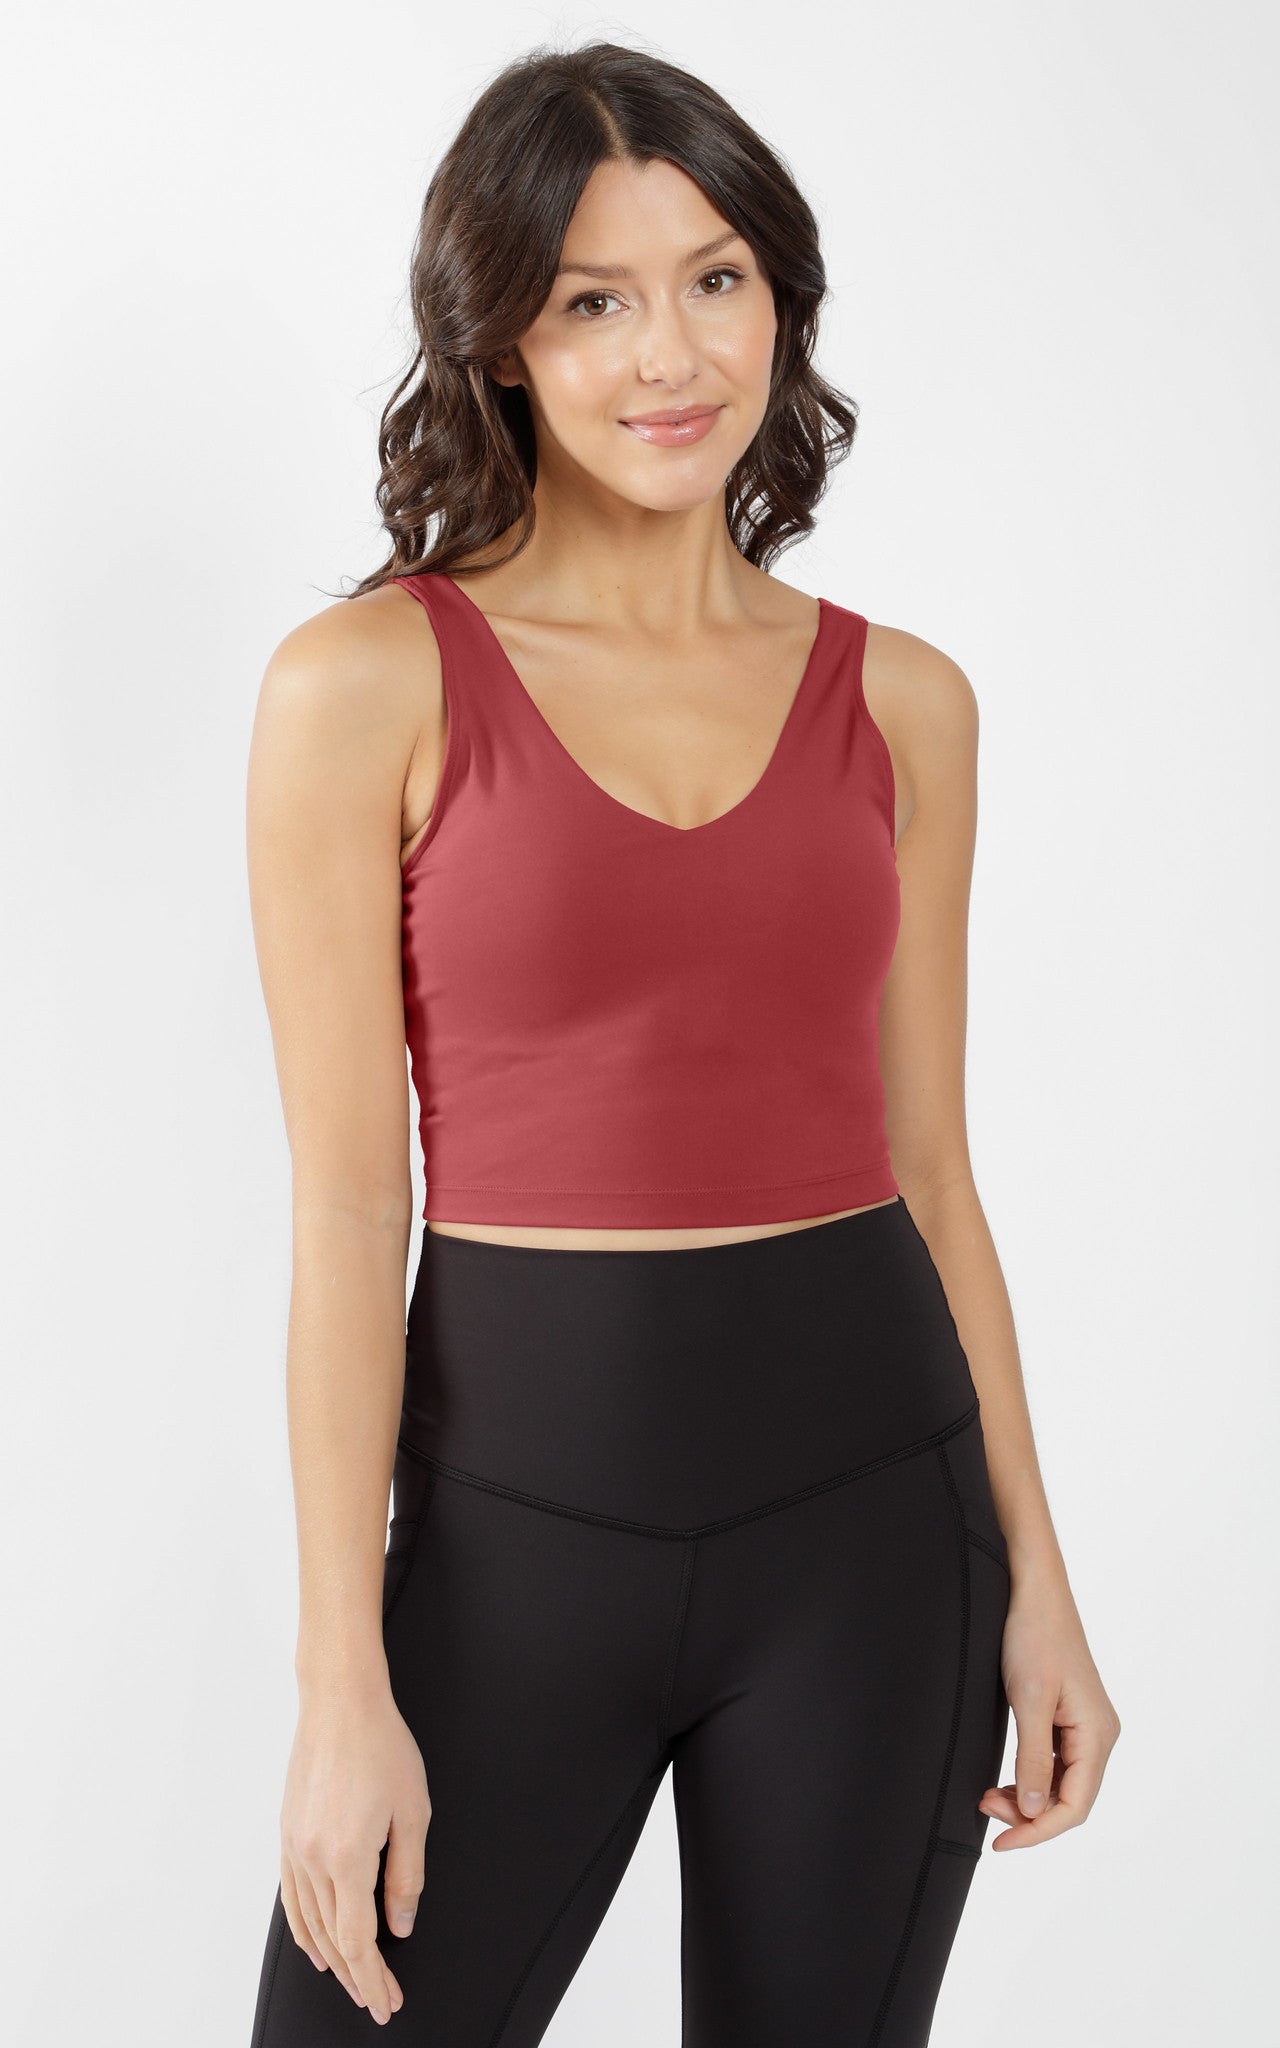 Women's Personality Tank Top With Built-in Bra Pad, Short Length Cropped,  Navel-baring Style, Backless And Off-the-shoulder Design, Prevent Light And  Anti-slip